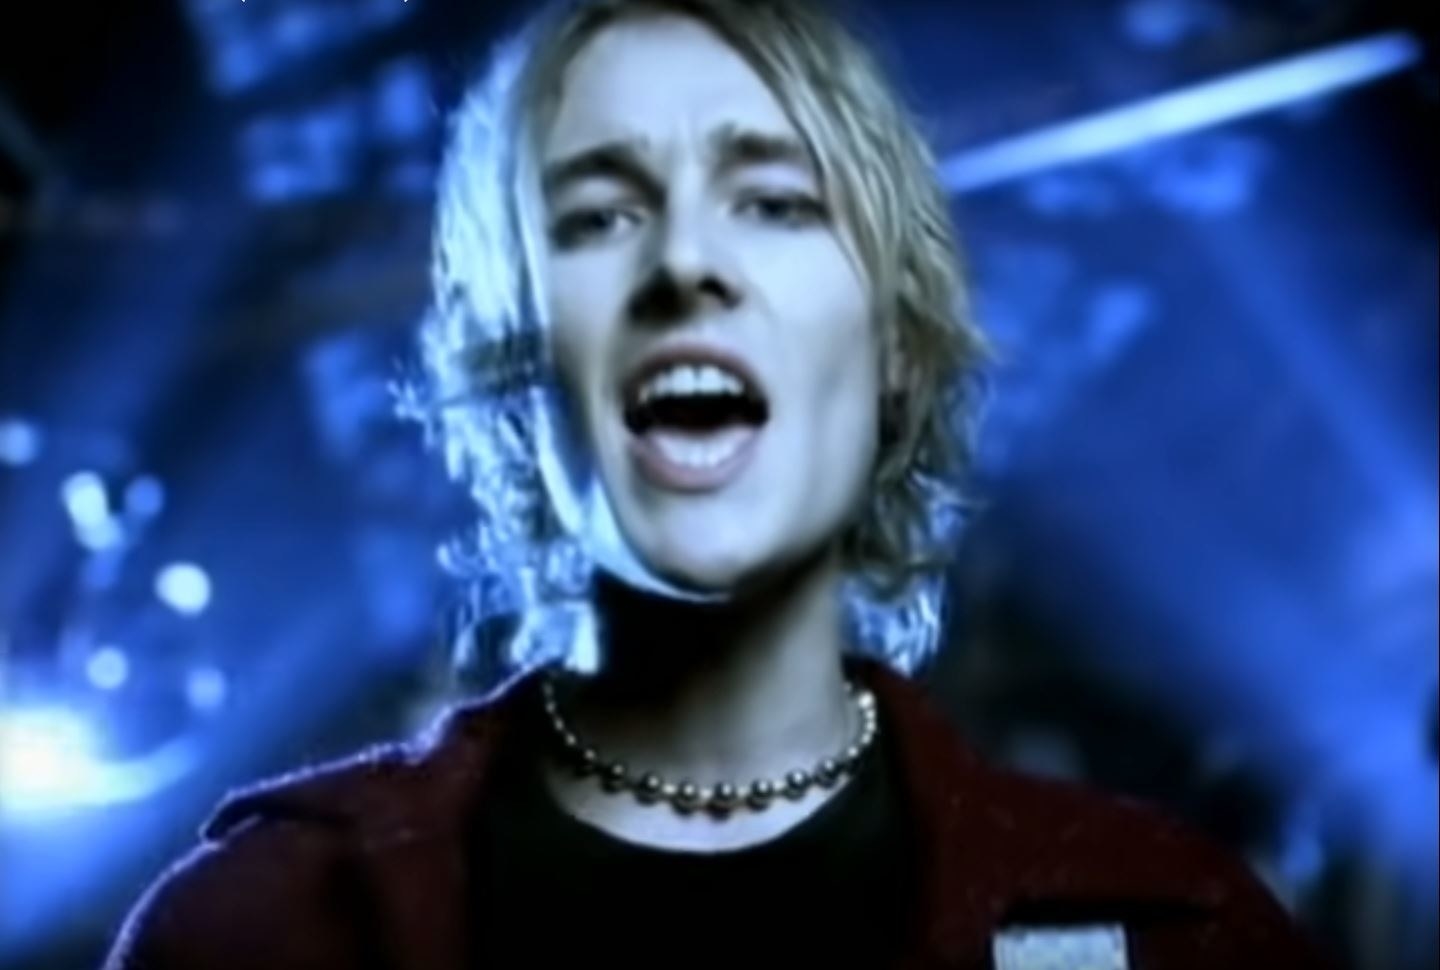 A young Daniel Johns singing against a blue background